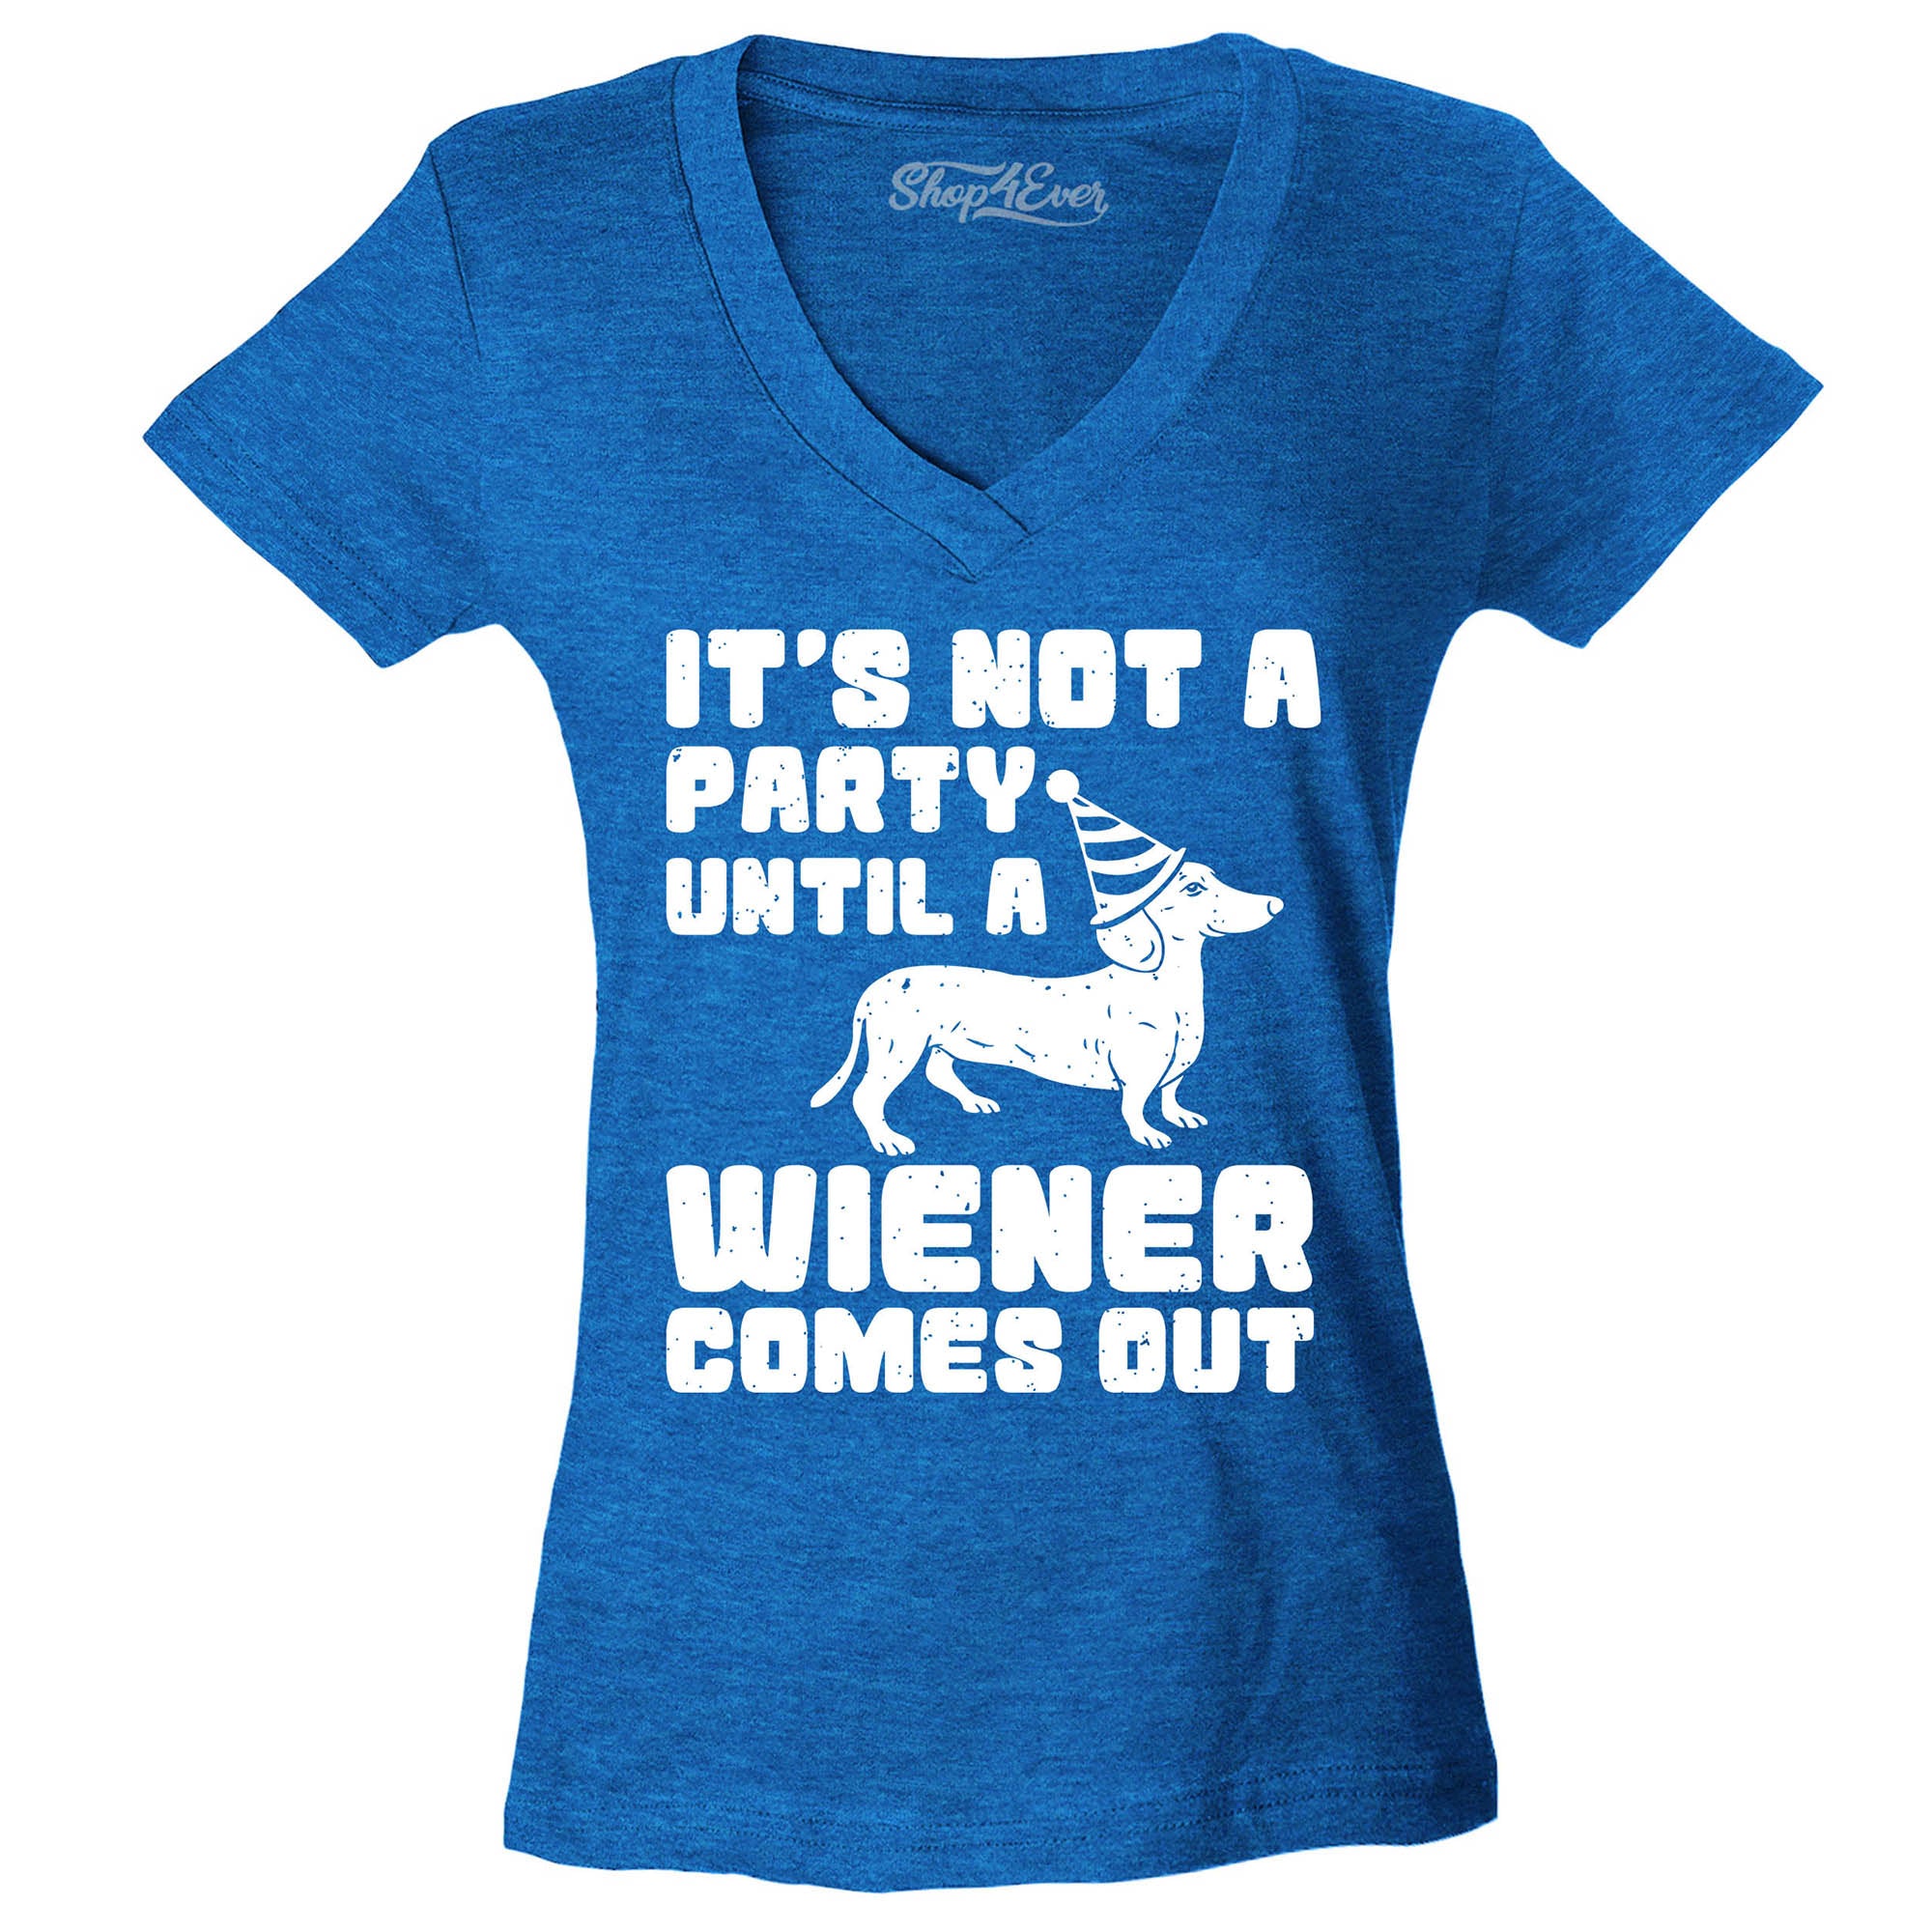 It's Not a Party Until The Wiener Comes Out Funny Dachshund Women's V-Neck T-Shirt Slim Fit